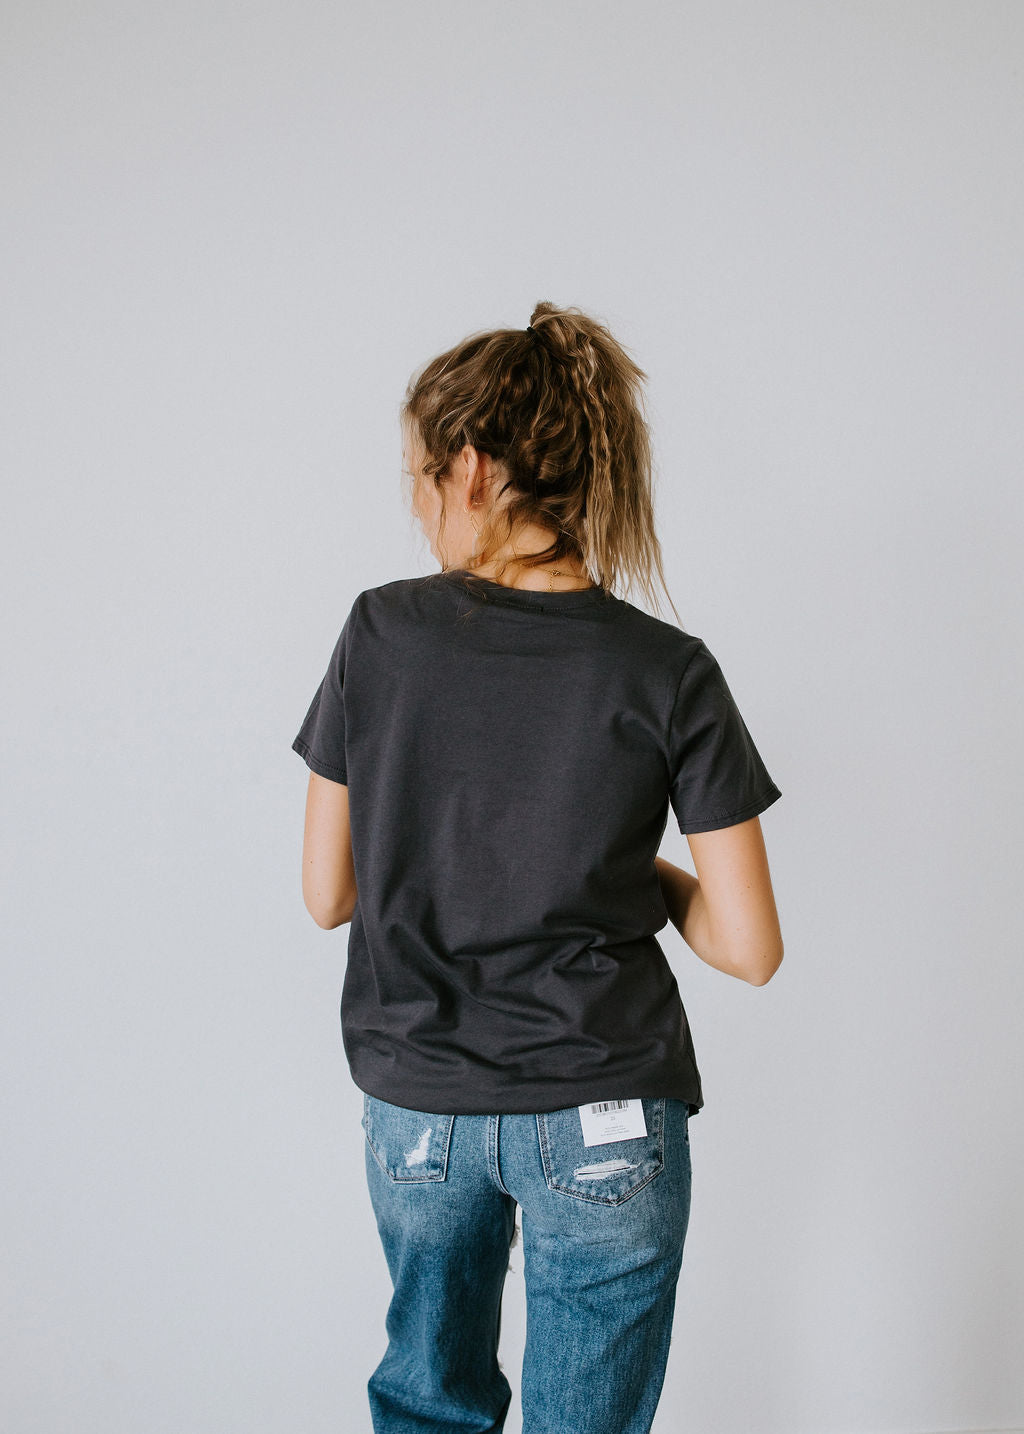 Rock Vibes Only Graphic Tee